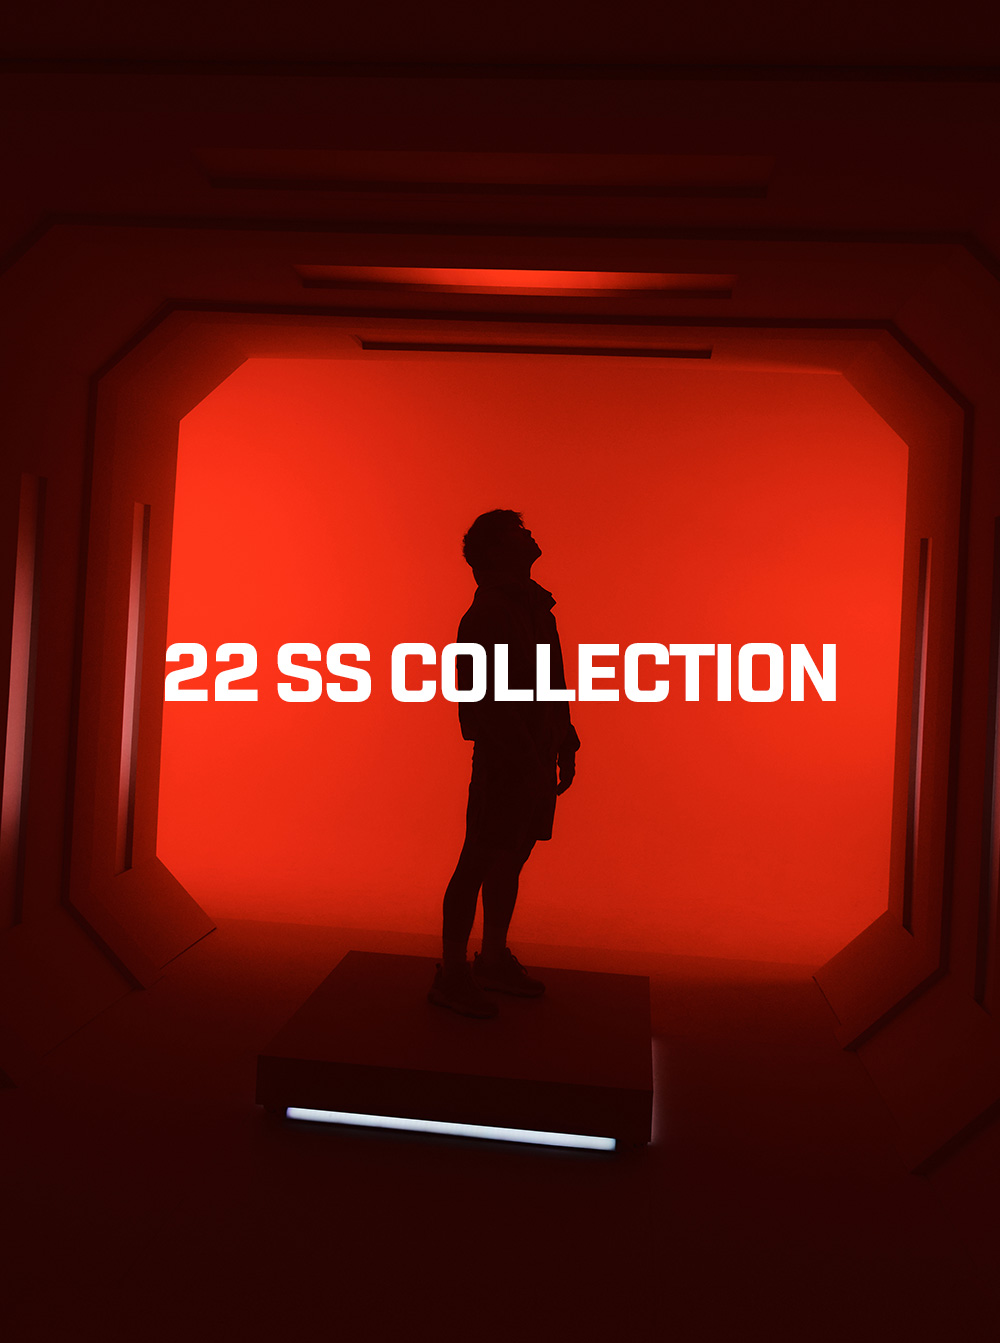 22 SS COLLECTION